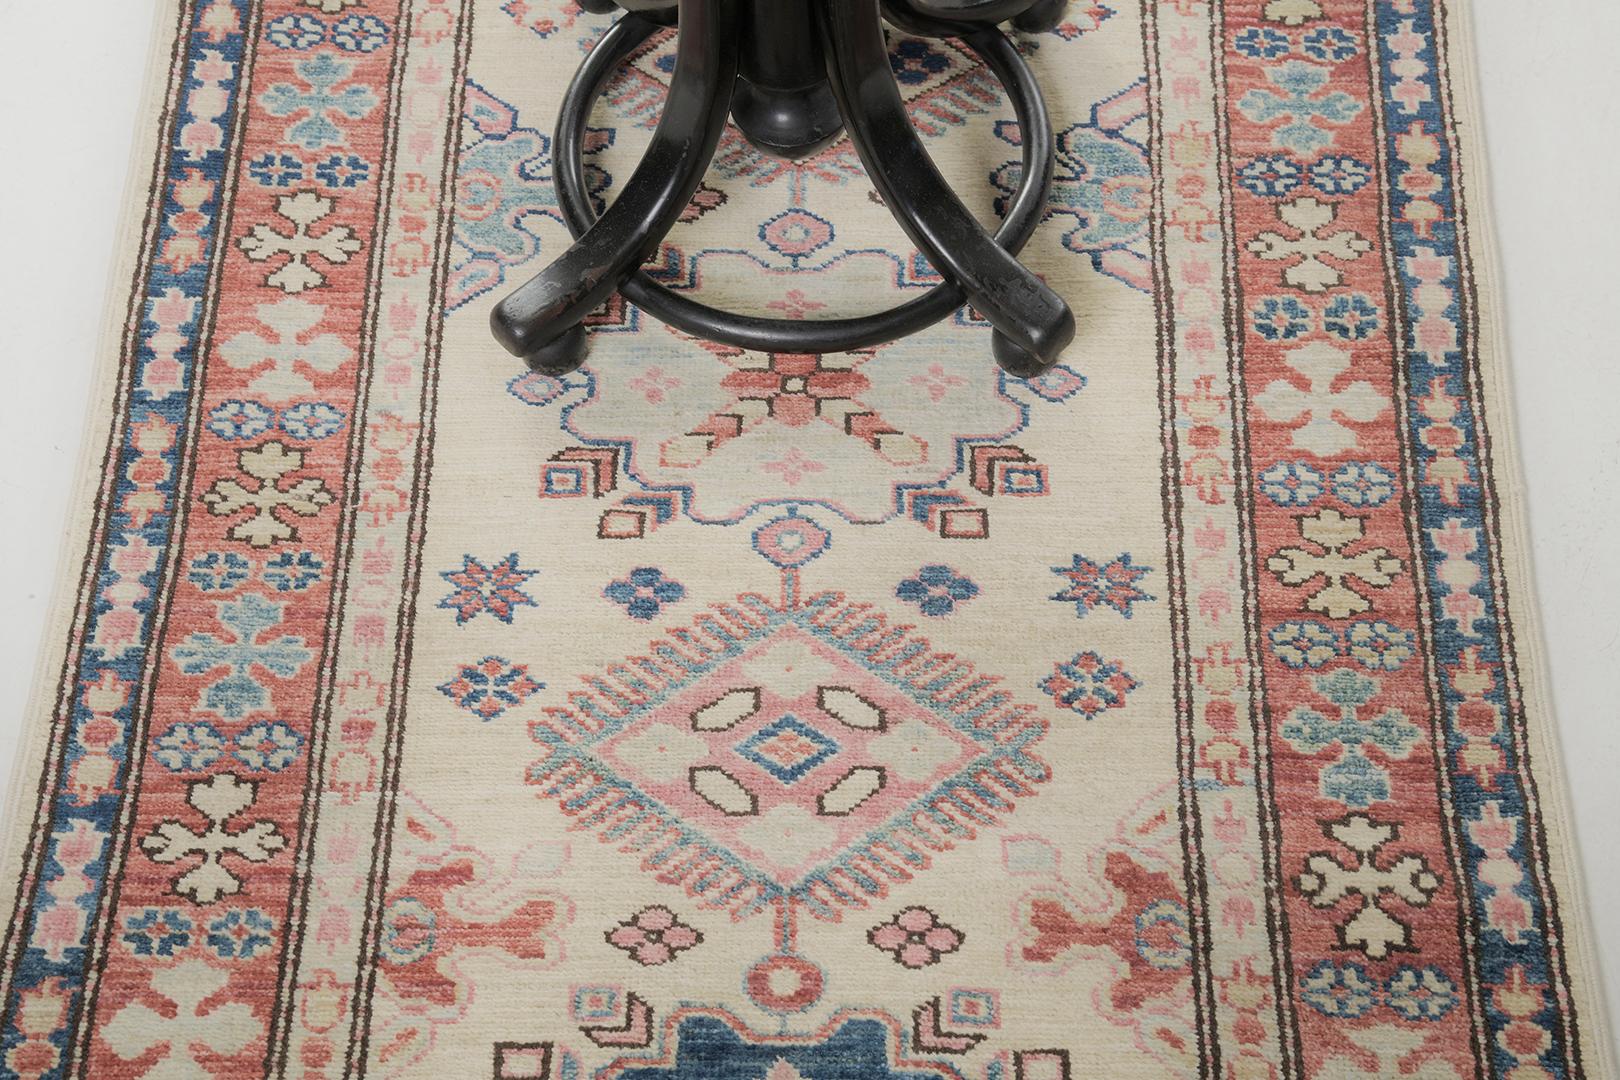 Behold and see the elegance of Kazak Design rug revival from our collection. Tones of blue, tan, and cream featured the symmetrical and outline details of hexagonal medallions, symbolic elements, and all. Furniture that has a minimalist idea, makes